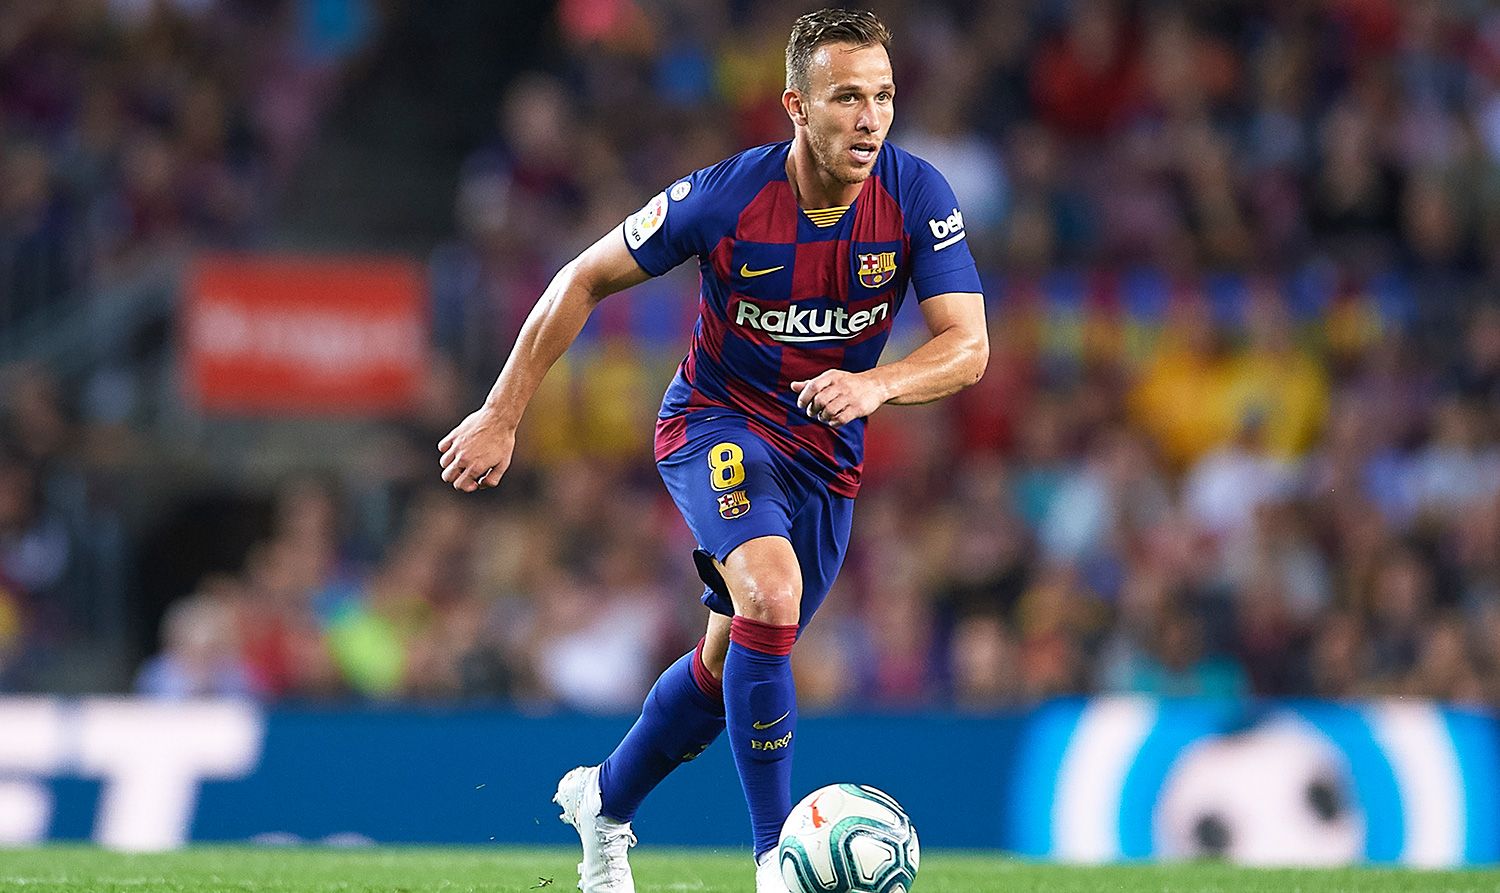 Arthur during the party against the Seville